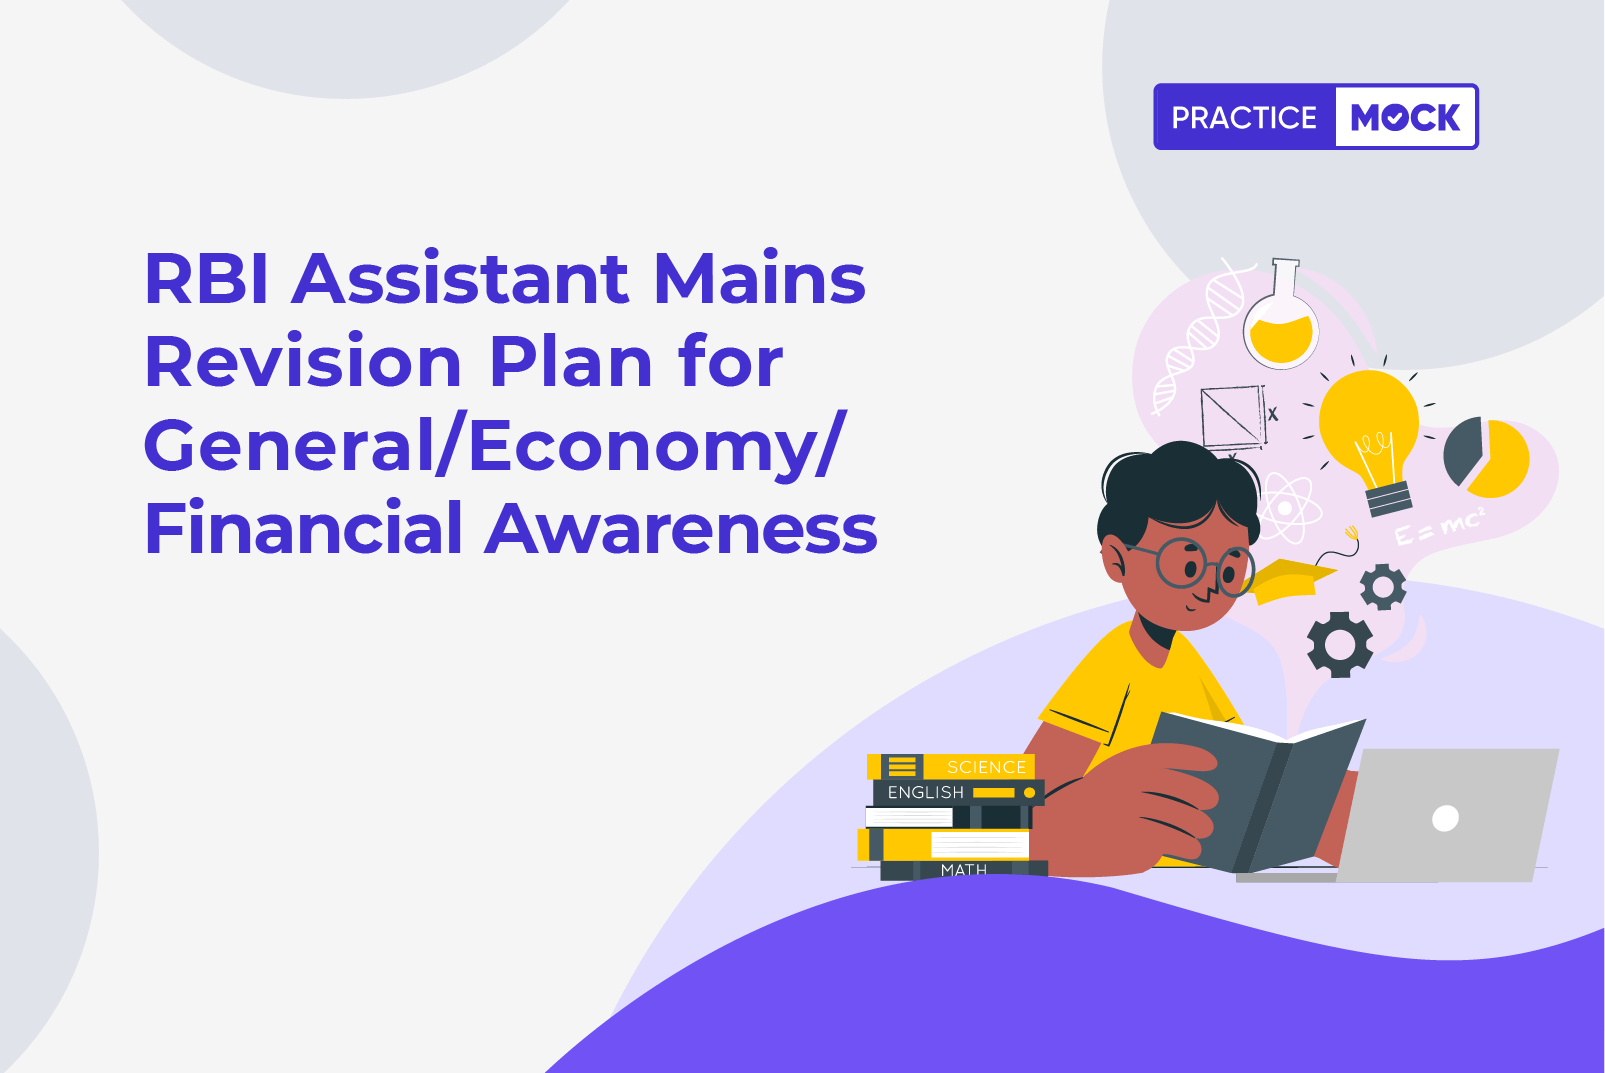 RBI Assistant Mains Revision Plan for General Economy Financial Awareness